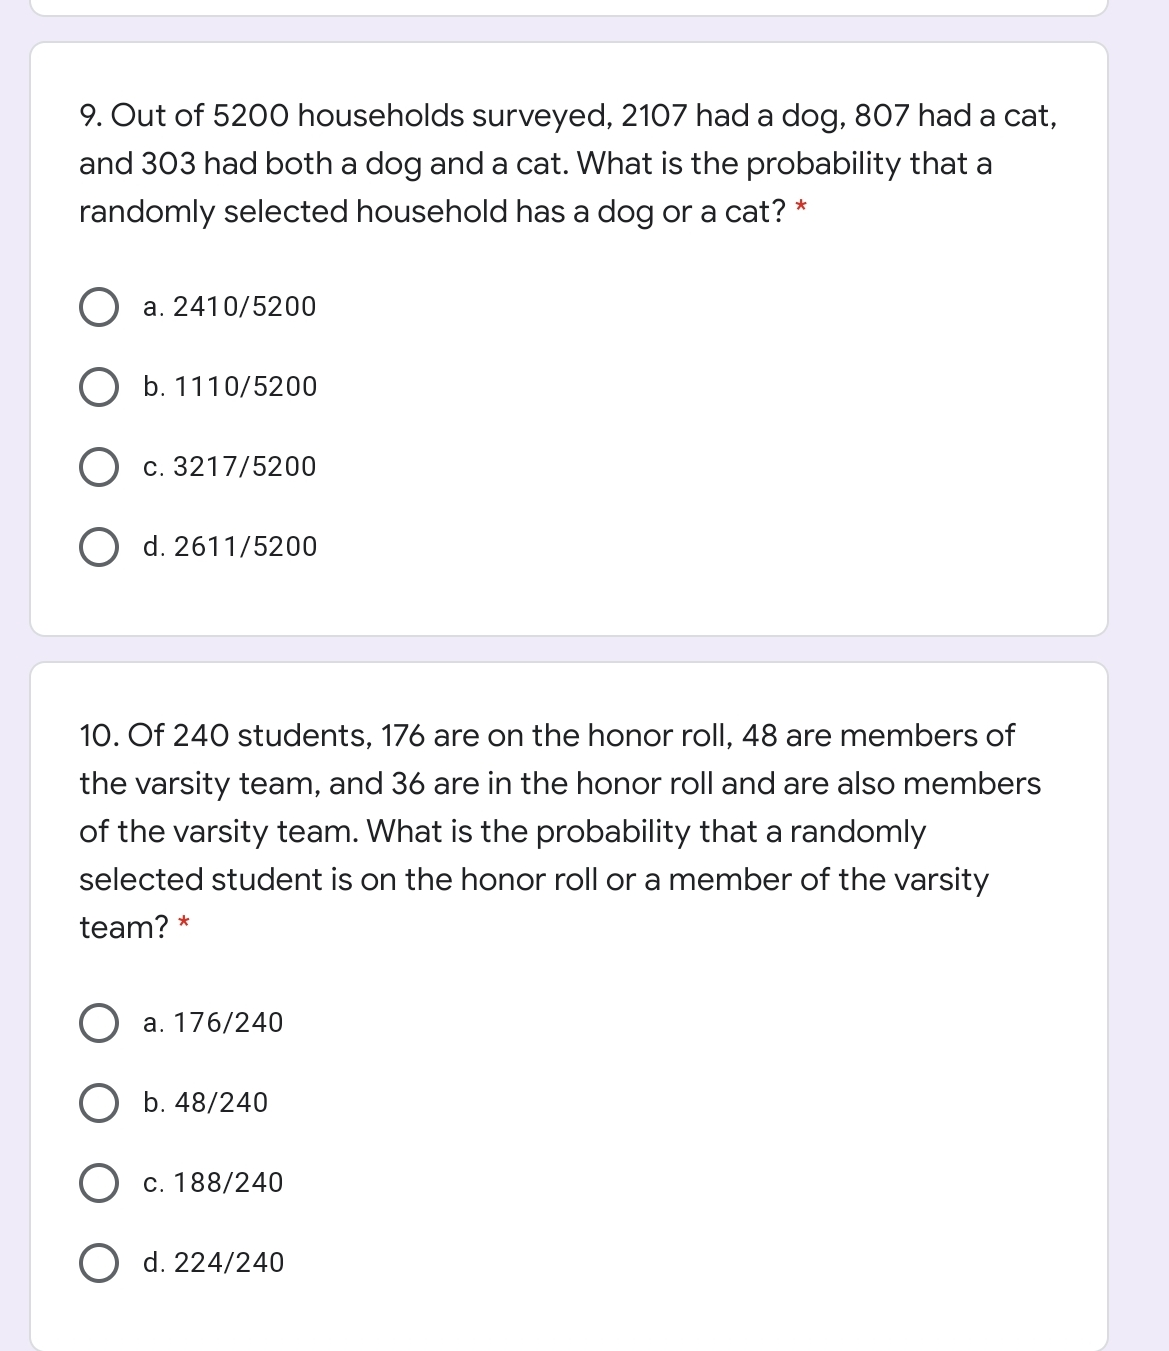 9. Out of 5200 households surveyed, 2107 had a dog, 807 had a cat, and 303 had both a dog and a cat. What is the probability that a randomly selected household has a dog or a cat? ' a. 2410/5200 b. 1110/5200 c. 3217/5200 d. 2611/5200 10. Of 240 students, 176 are on the honor roll, 48 are members of the varsity team, and 36 are in the honor roll and are also members of the varsity team. What is the probability that a randomly selected student is on the honor roll or a member of the varsity team? * a. 176/240 b. 48/240 c. 188/240 d. 224/240